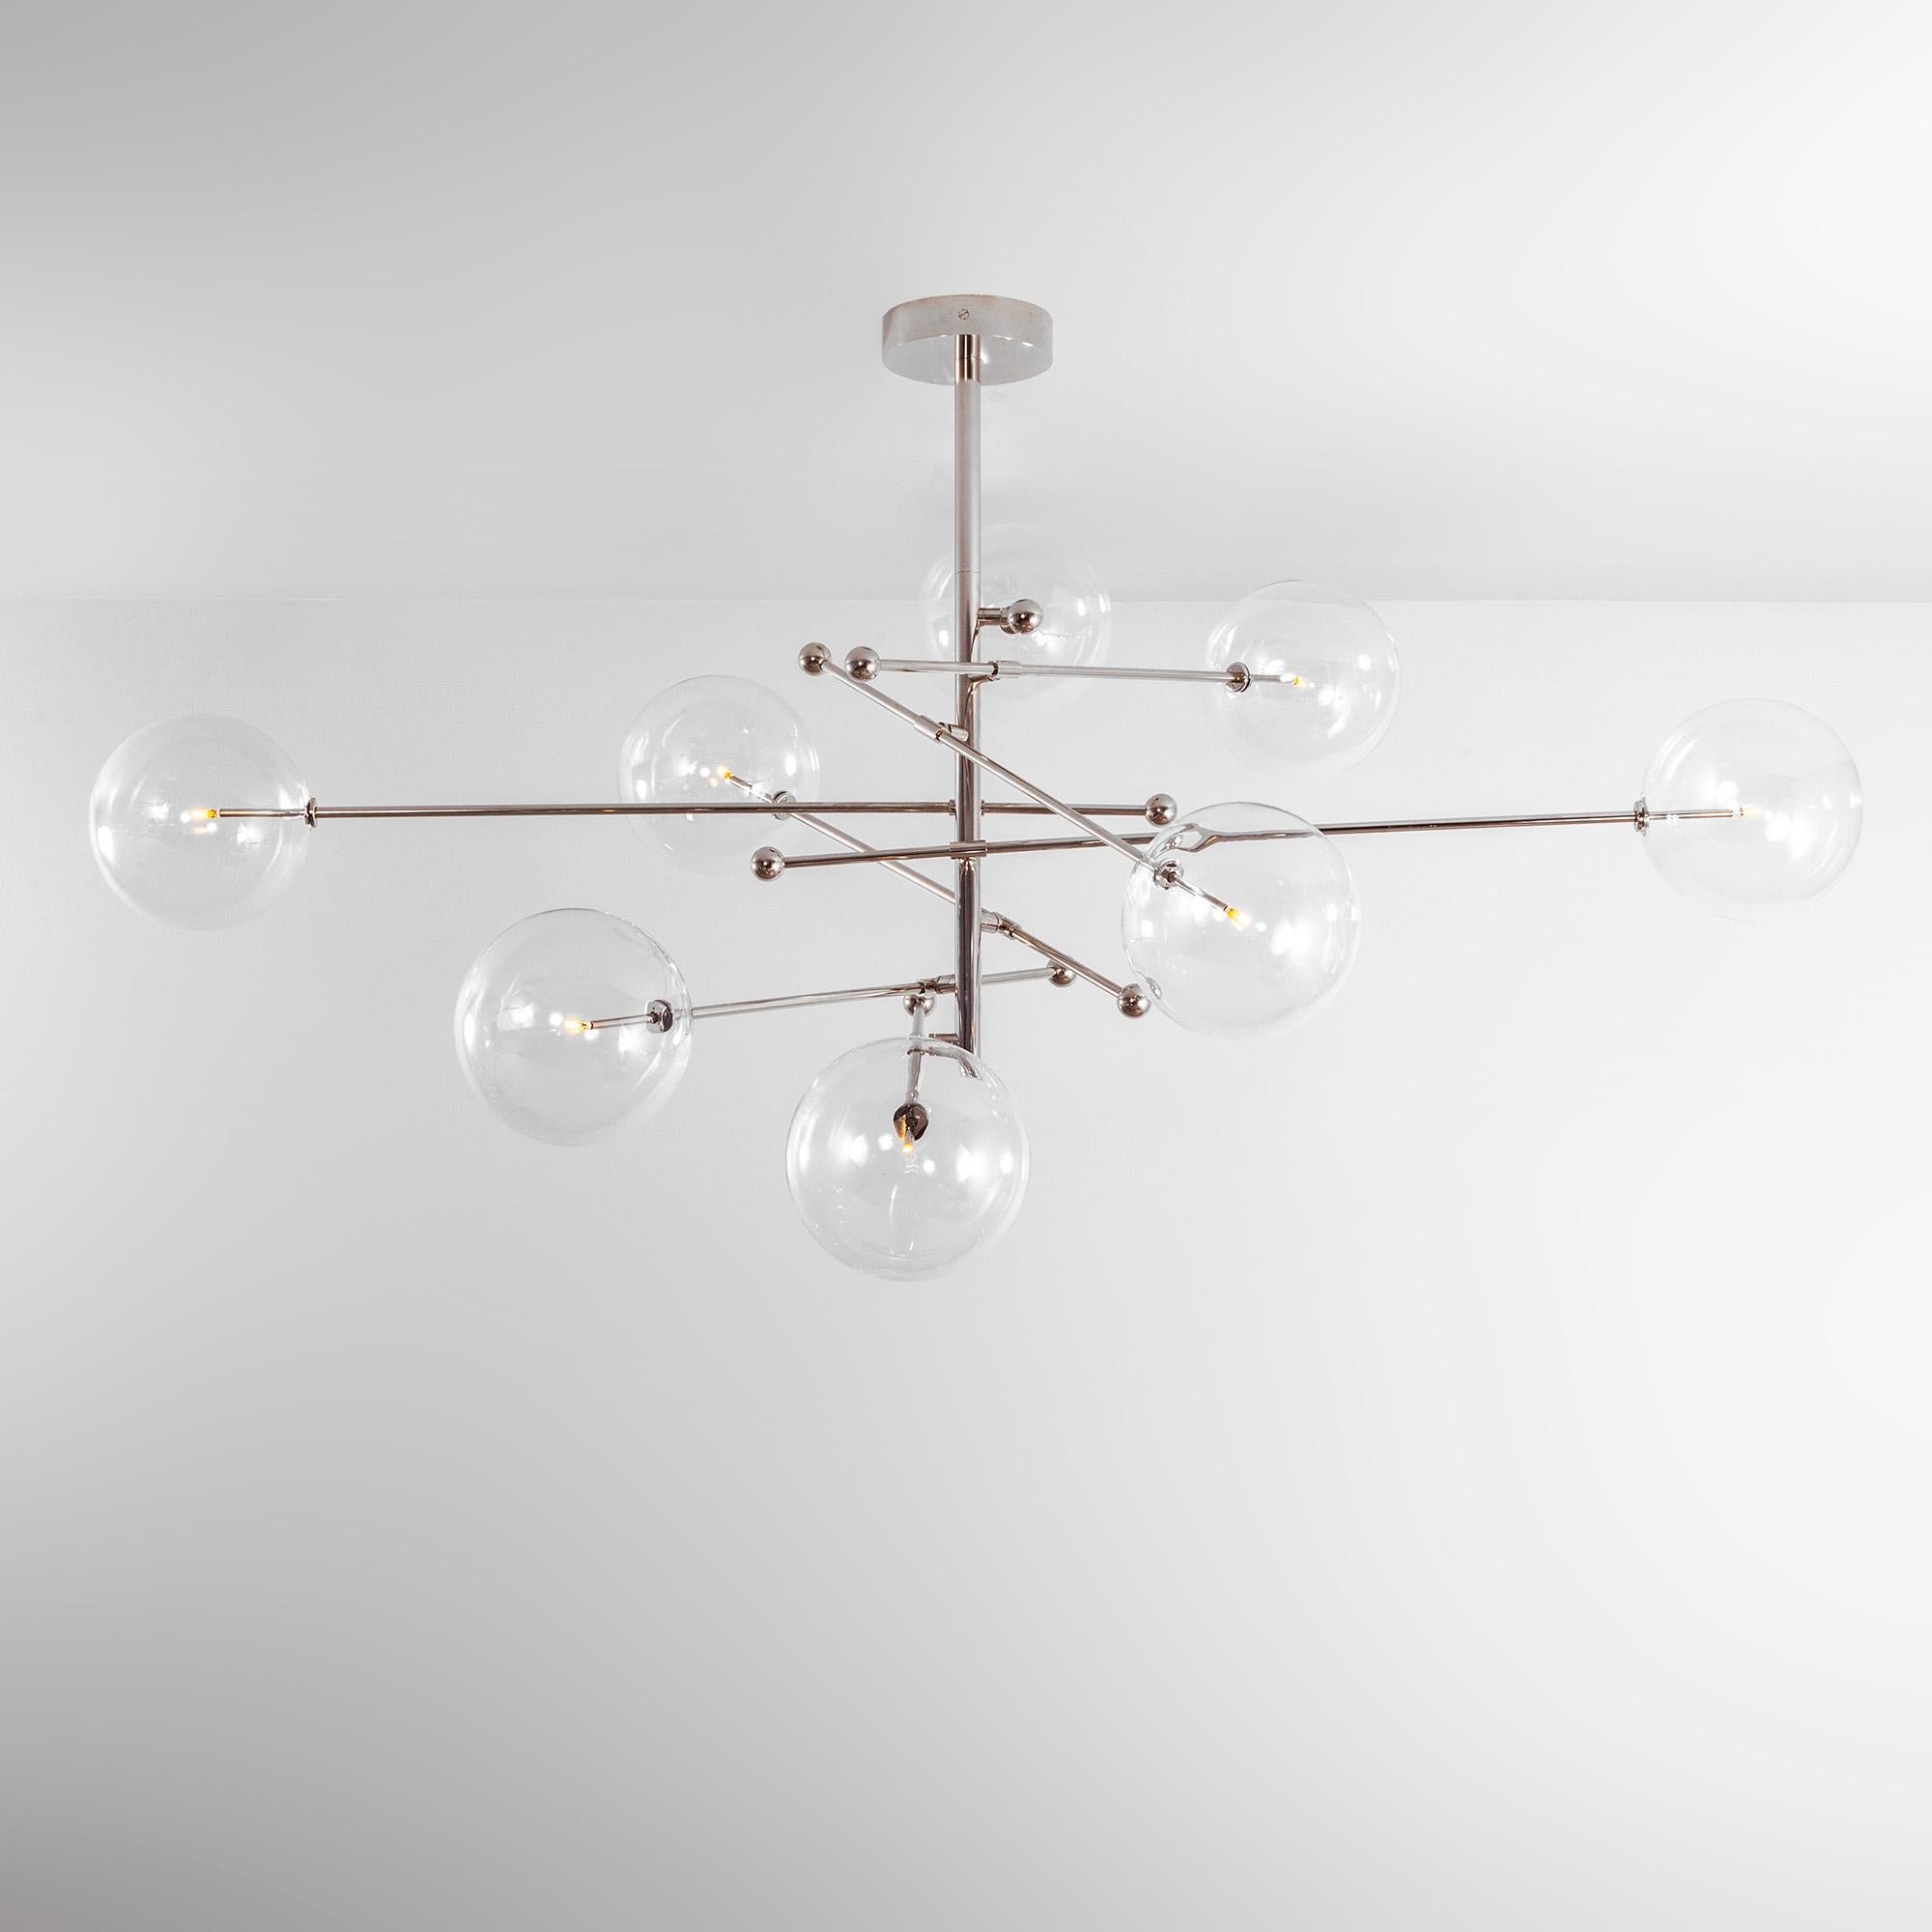 RD15 12 arms polished nickel chandelier by Schwung
Dimensions: W 140 x D 140 x H 89.1 cm
Materials: Solid brass. Hand blown glass globes
Finishes: Polished nickel. Available also in black gunmetal, and lacquered burnished brass. 
All our lamps